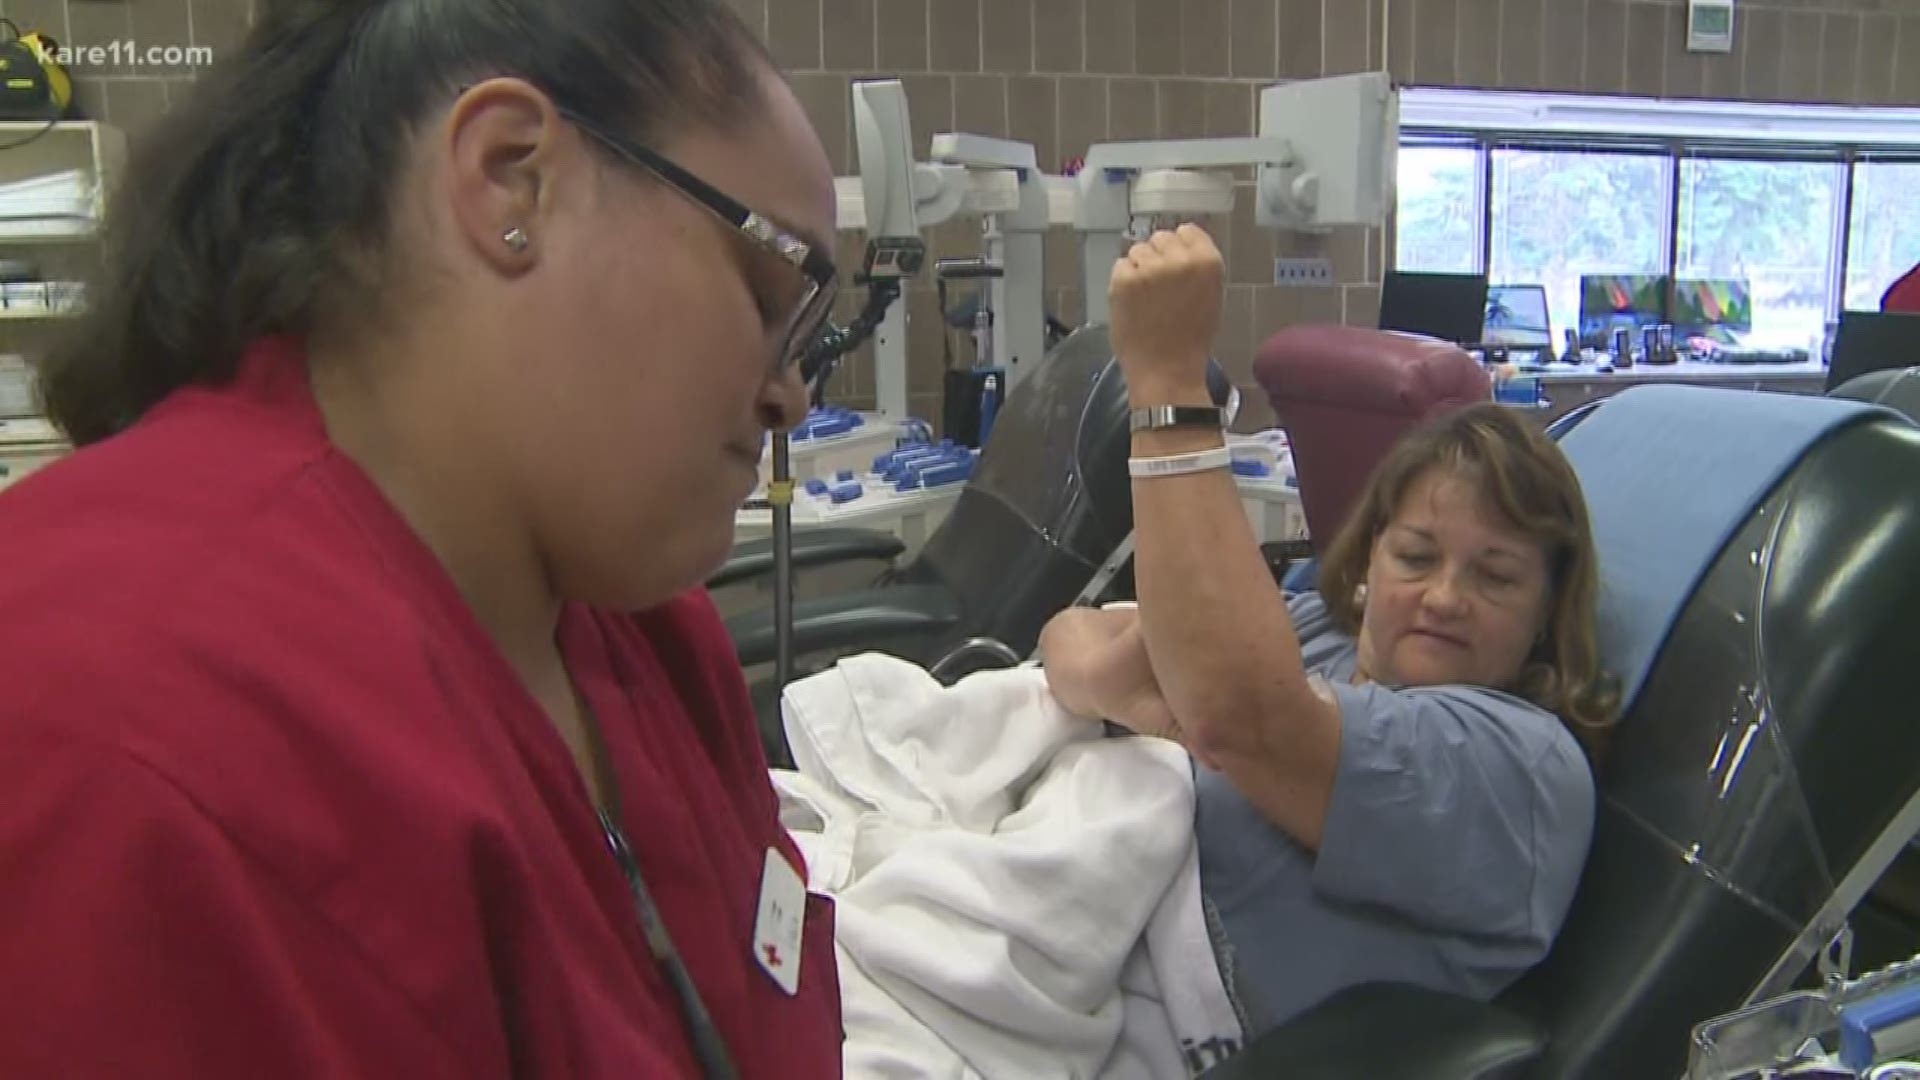 After a slow June and an even slower 4th of July, the Red Cross is now desperate for blood.